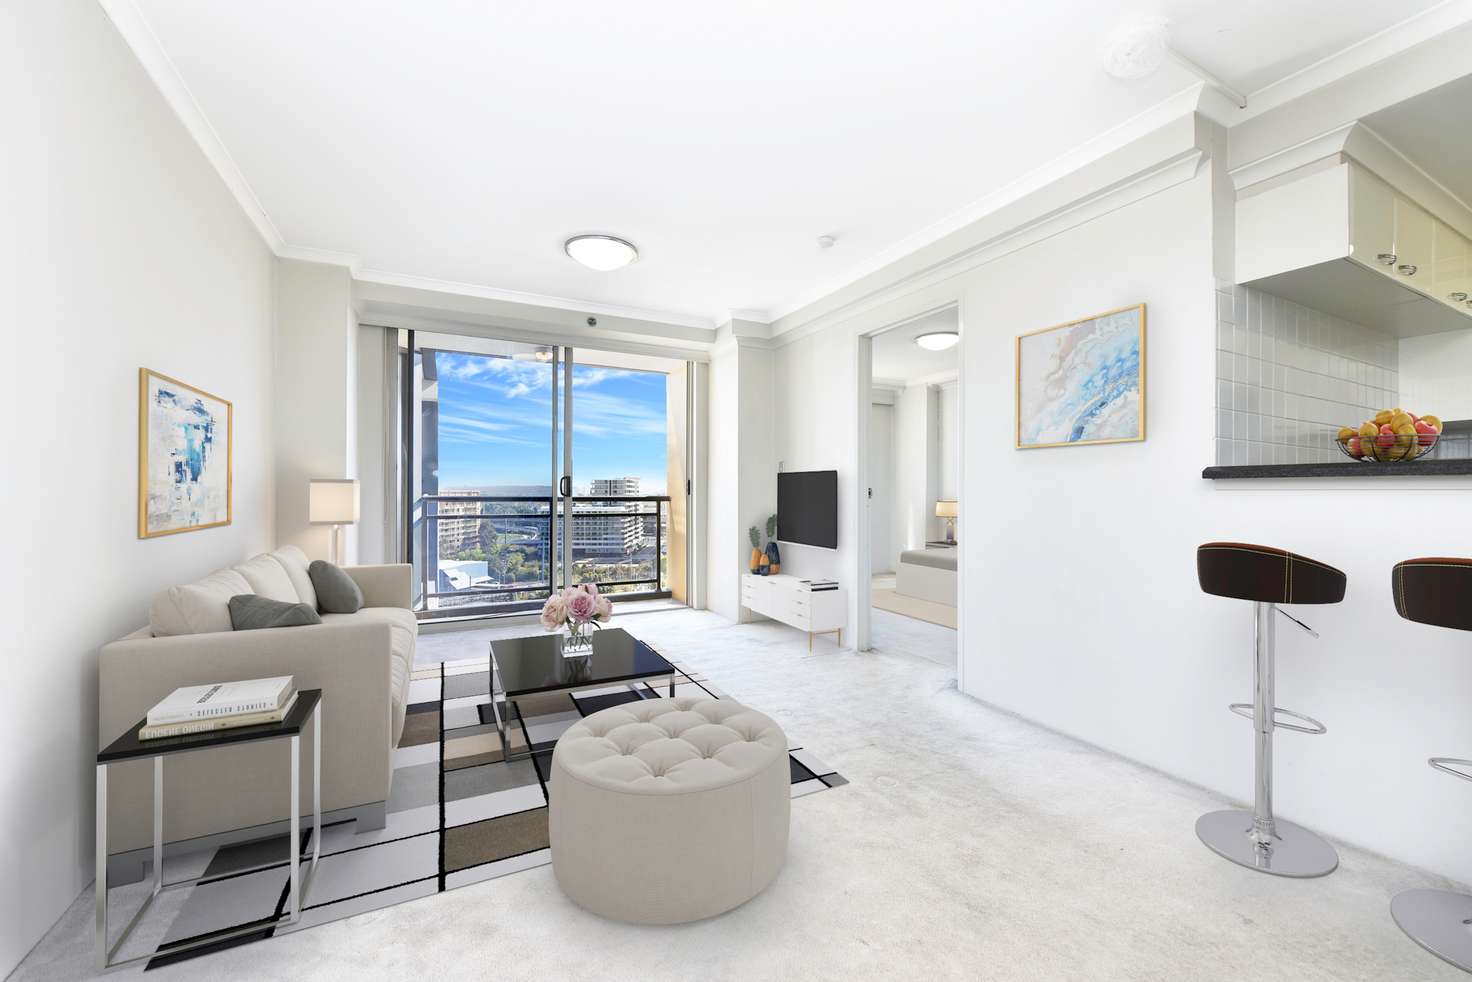 Main view of Homely apartment listing, 112/5-7 Beresford Road, Strathfield NSW 2135